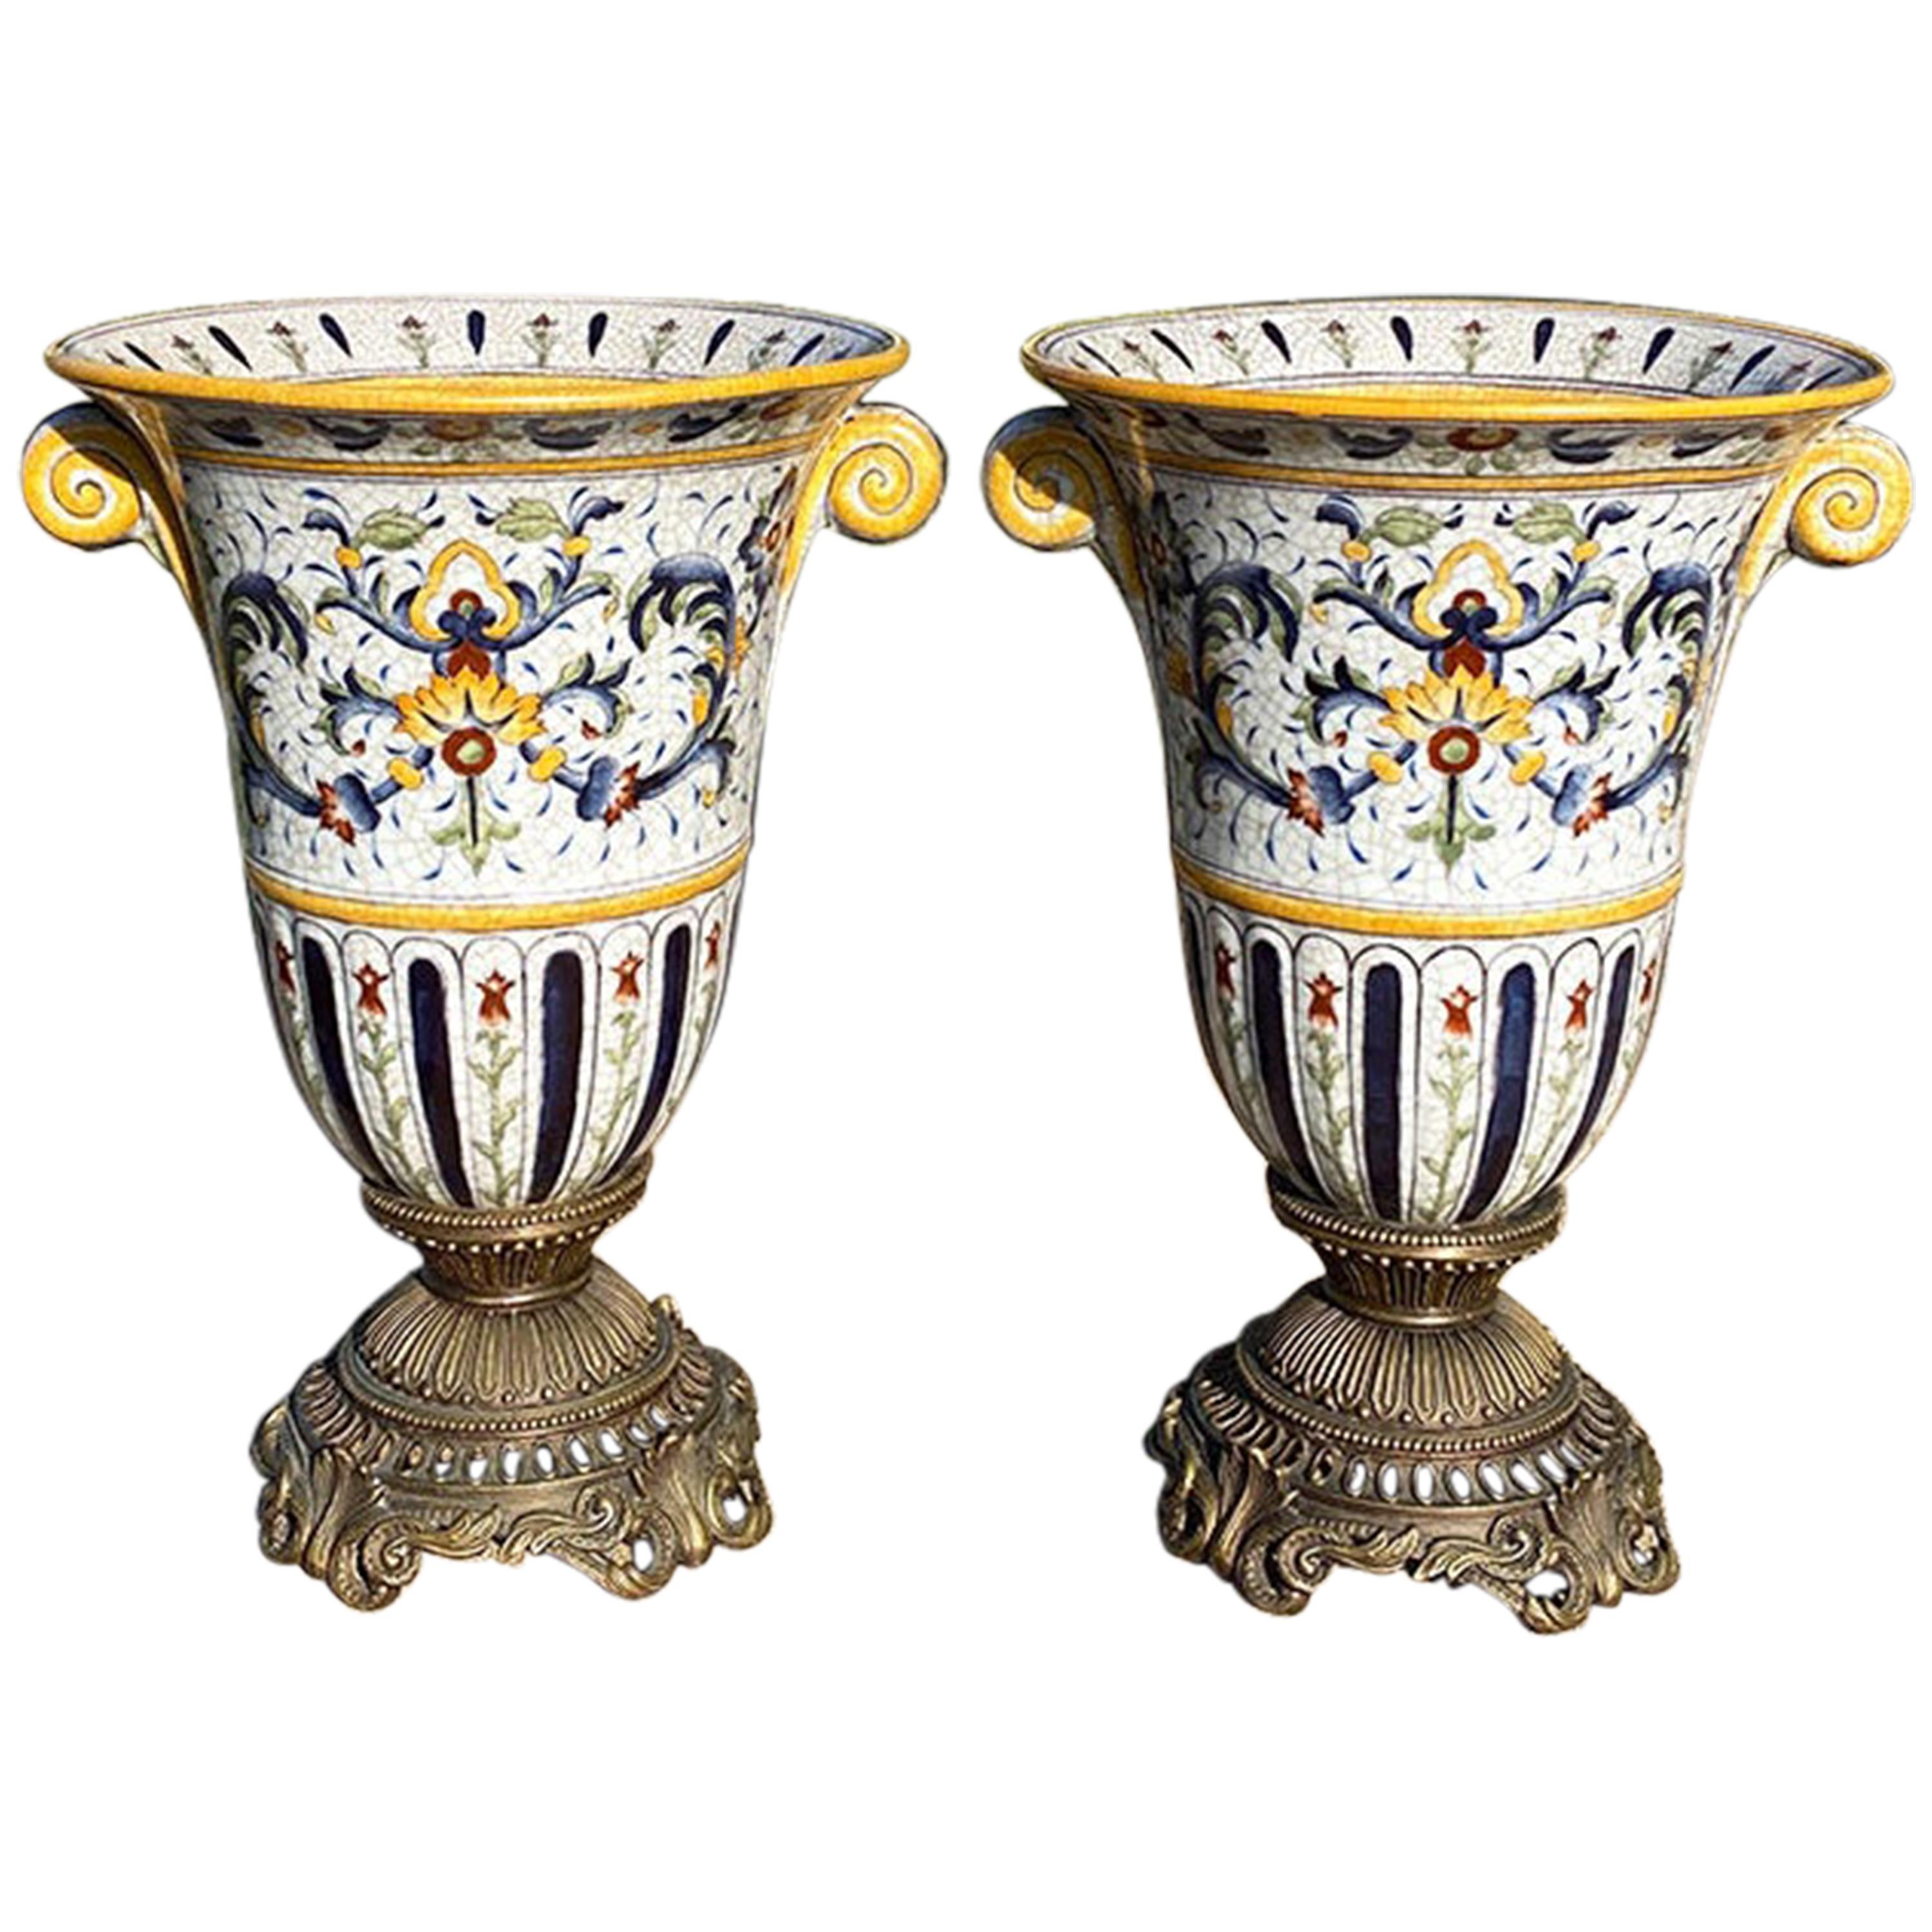 Pair of Monumental Mounted Ceramic Painted Craquelure Mounted Urns, Signed For Sale